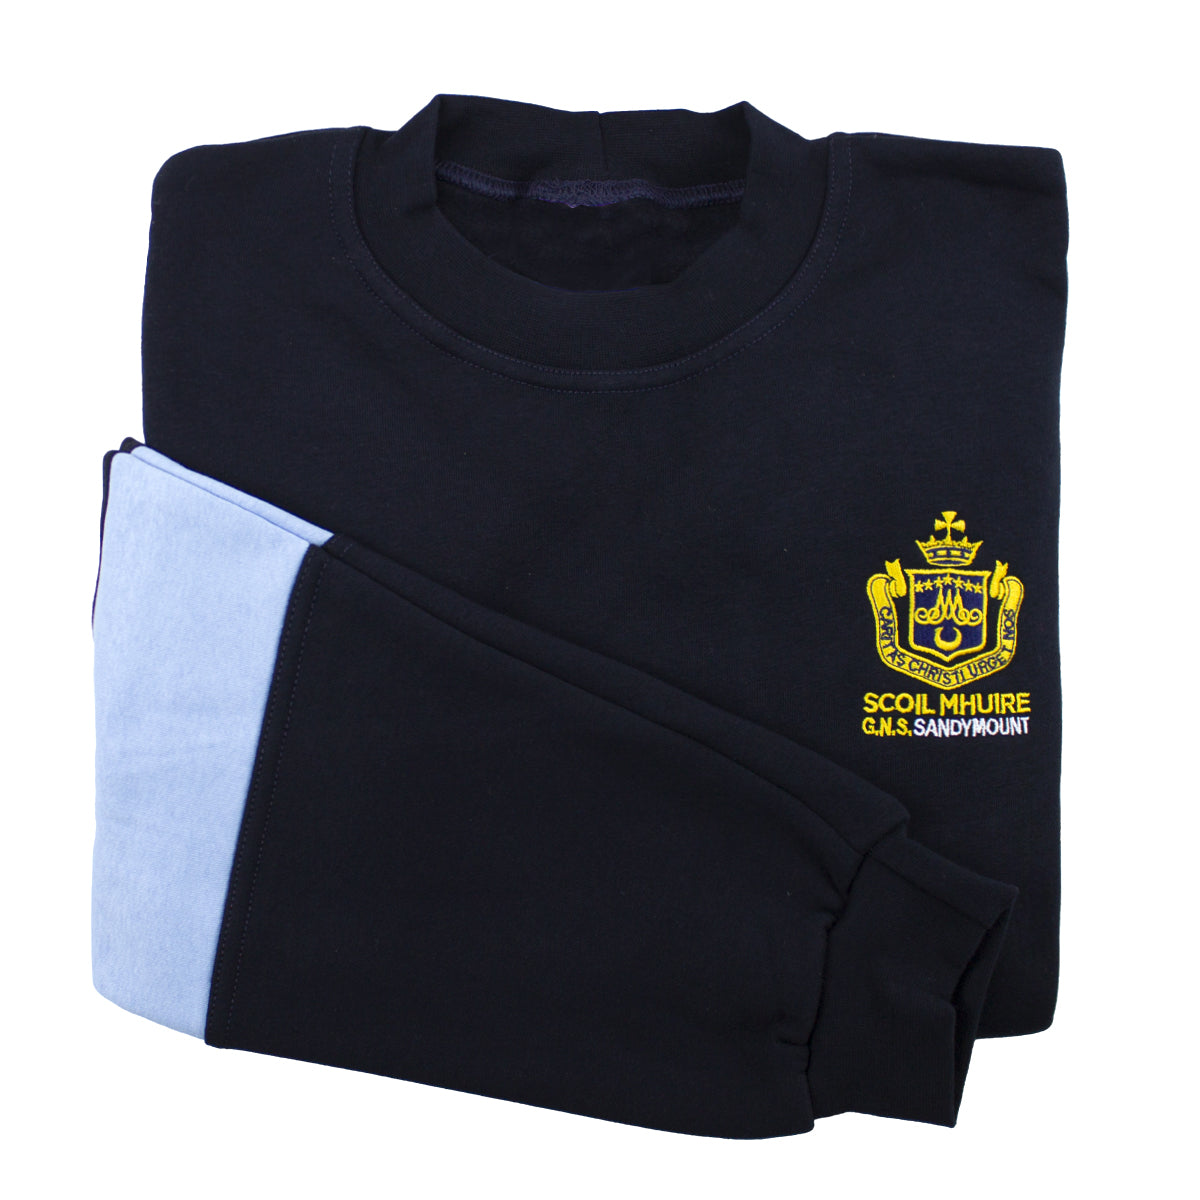 Scoil Mhuire Lakelands Tracksuit Top in Navy, with embroidered school crest on left chest. Pictured also is the sleeve detail with Sky inset around mid slleve.